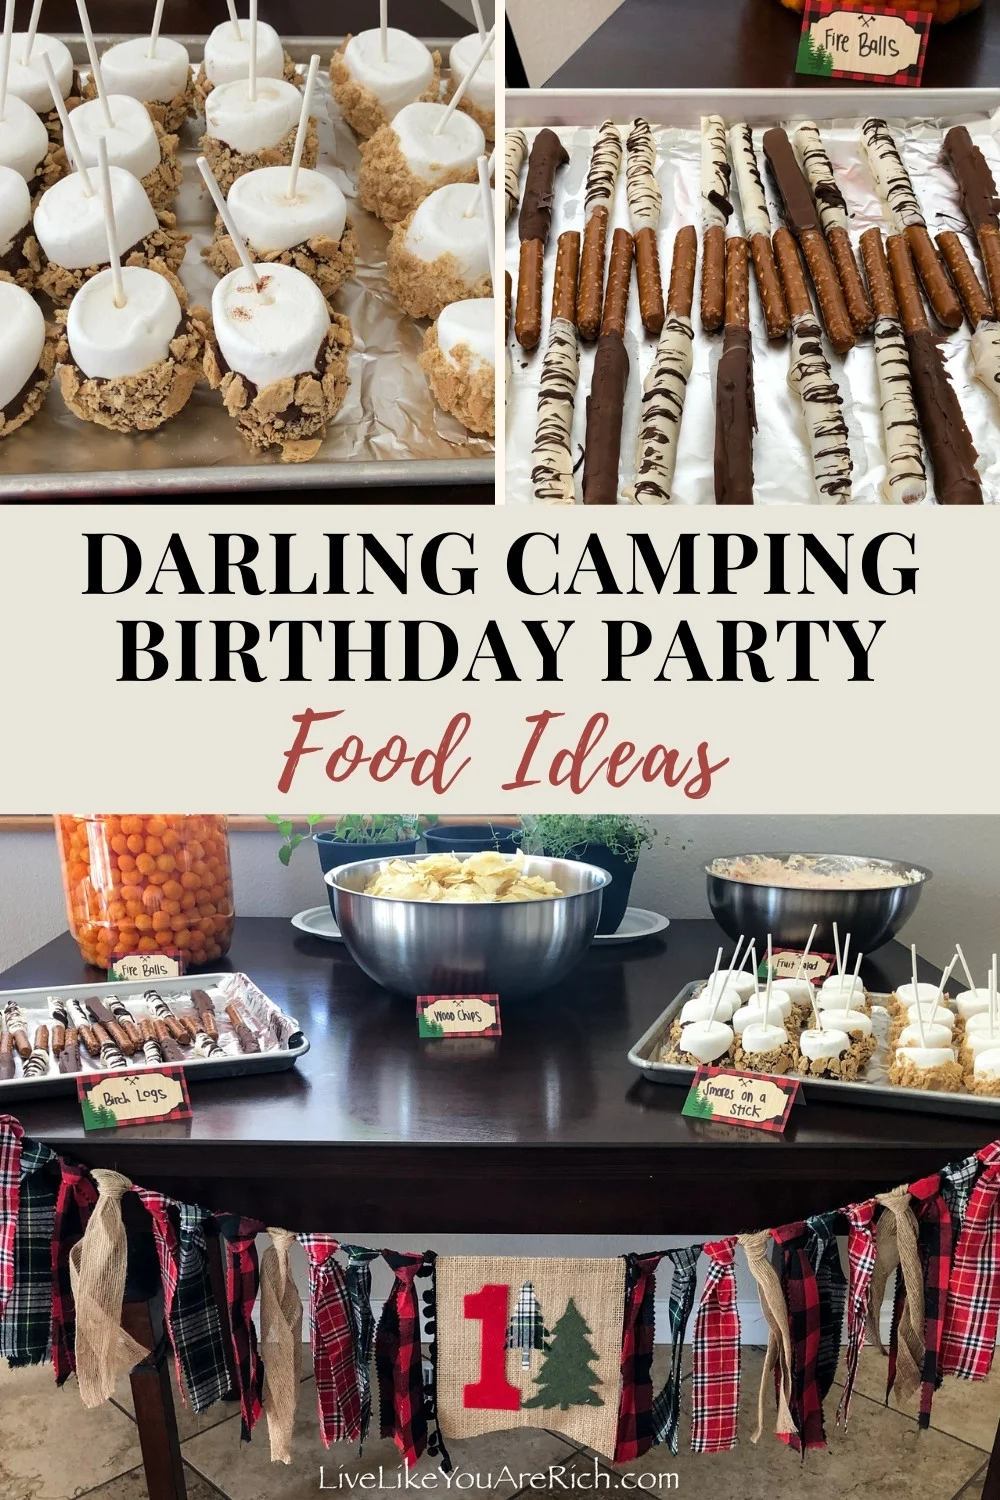 Darling Camping Birthday Party - Food Ideas